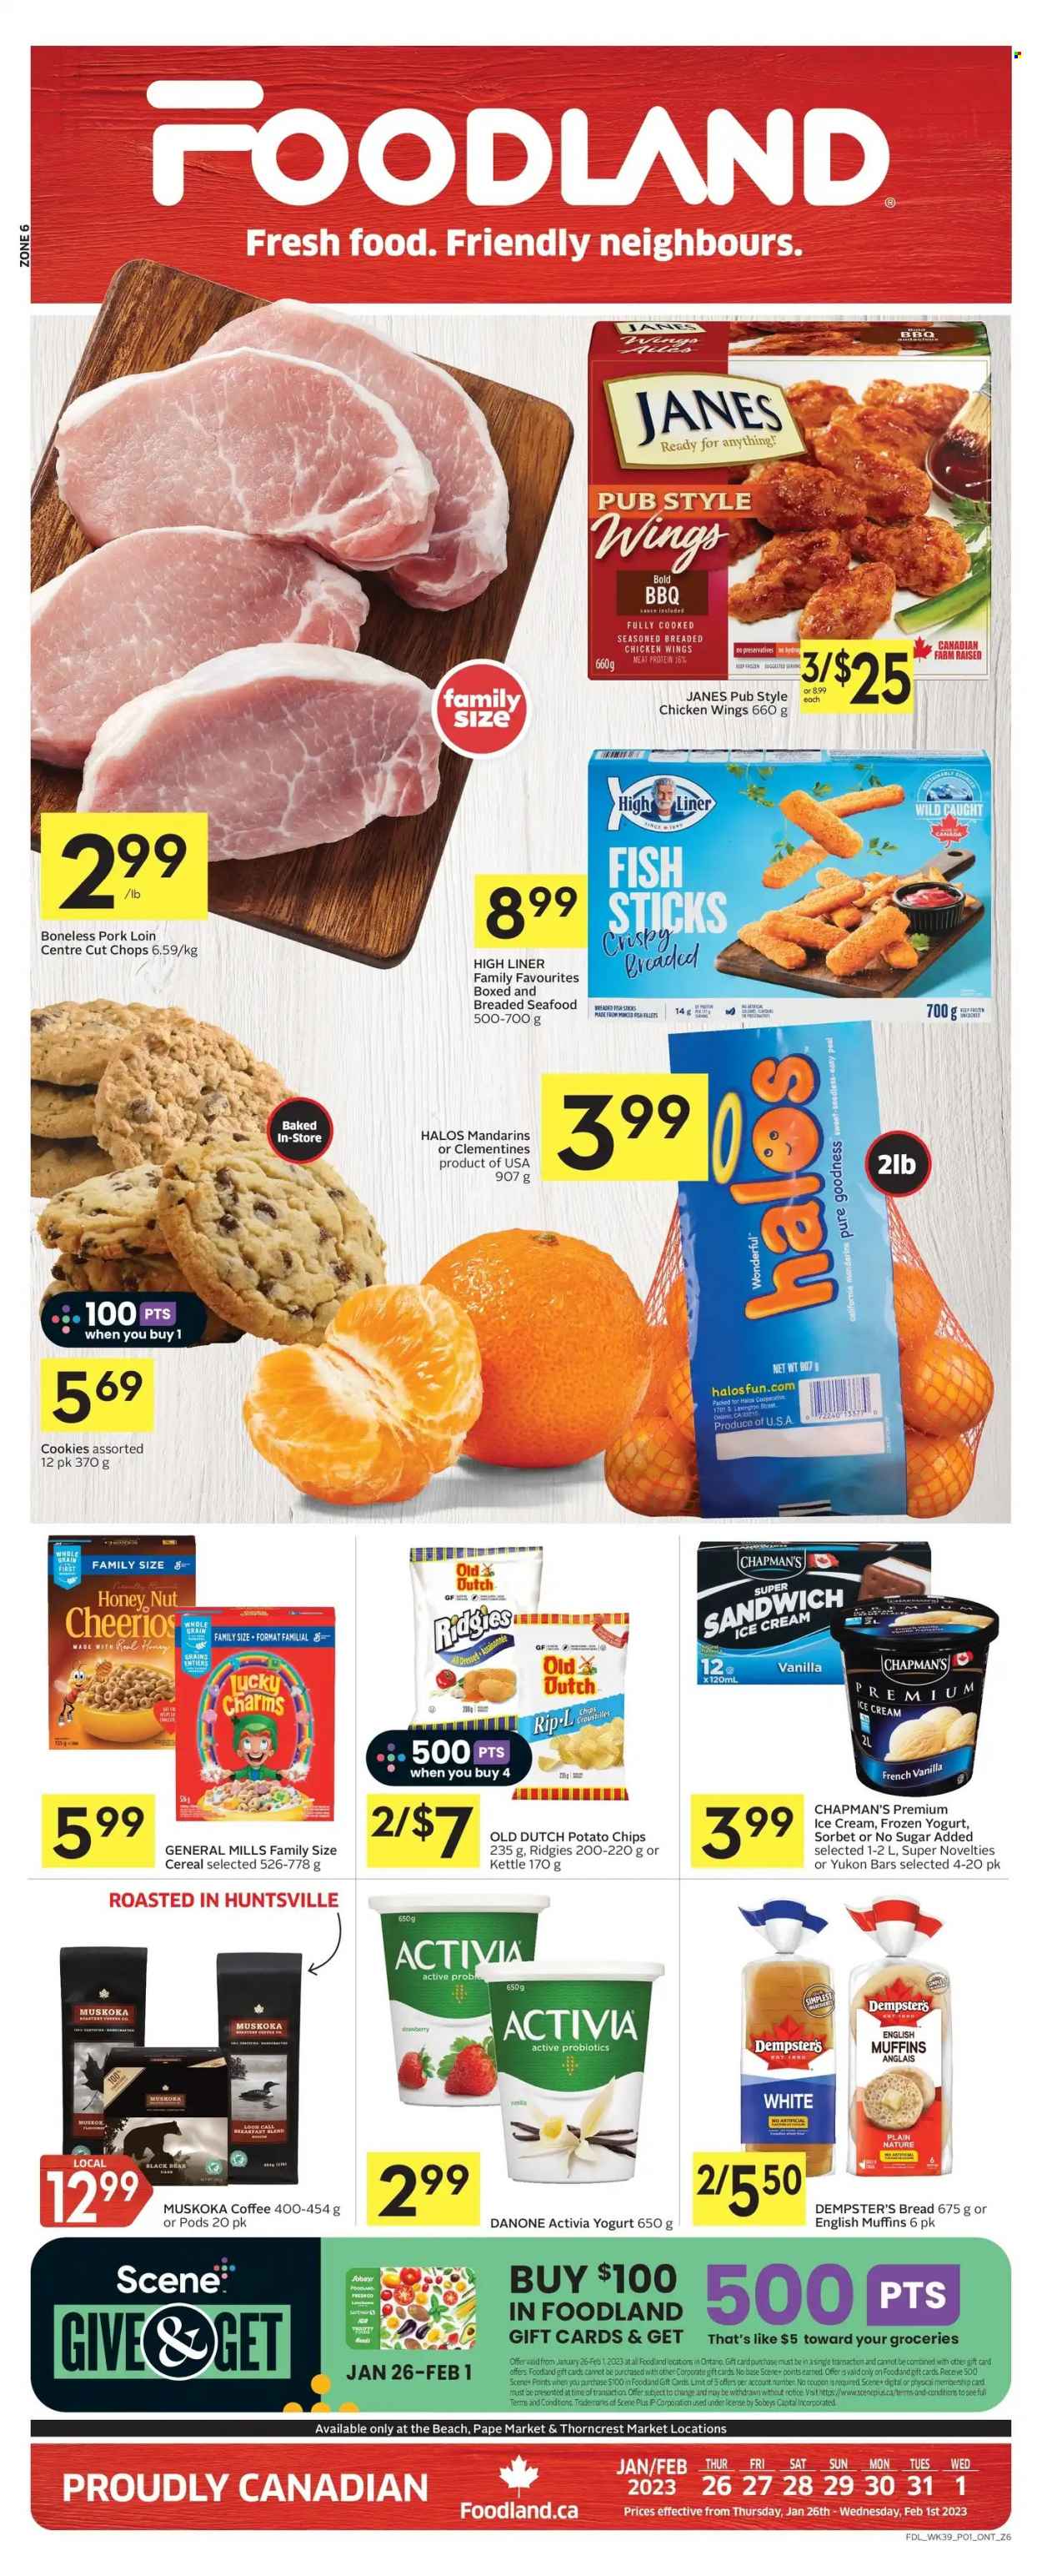 thumbnail - Foodland Flyer - January 26, 2023 - February 01, 2023 - Sales products - bread, english muffins, clementines, mandarines, seafood, sandwich, fish sticks, ready meal, breaded chicken, Danone, Activia, ice cream, frozen yoghurt, sorbet, General Mills, potato chips, Cheerios, pork loin, pork meat, probiotics. Page 1.